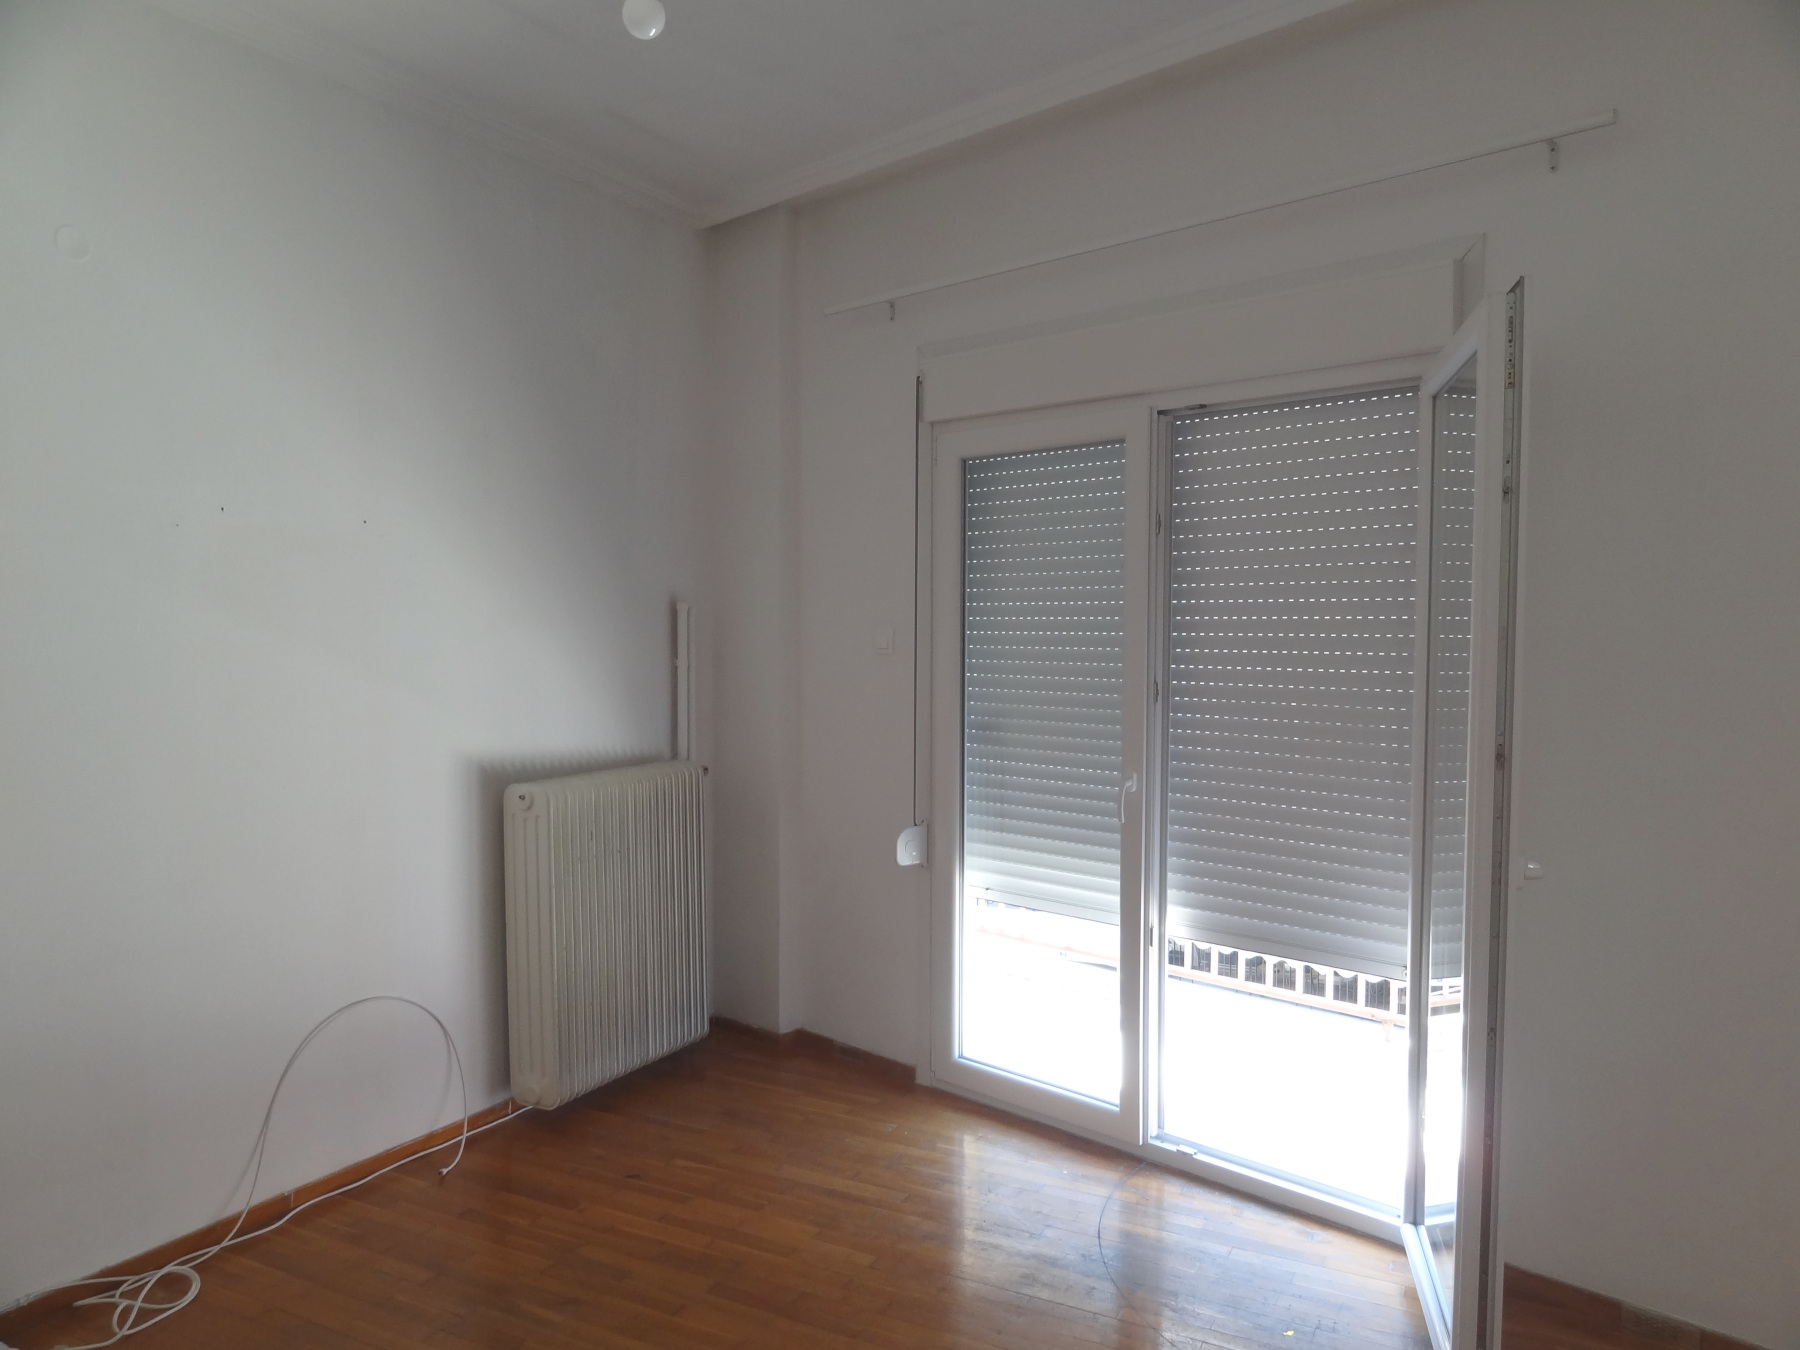 1 bedroom apartment for rent, 55 sq.m. 2nd floor near the center of Ioannina